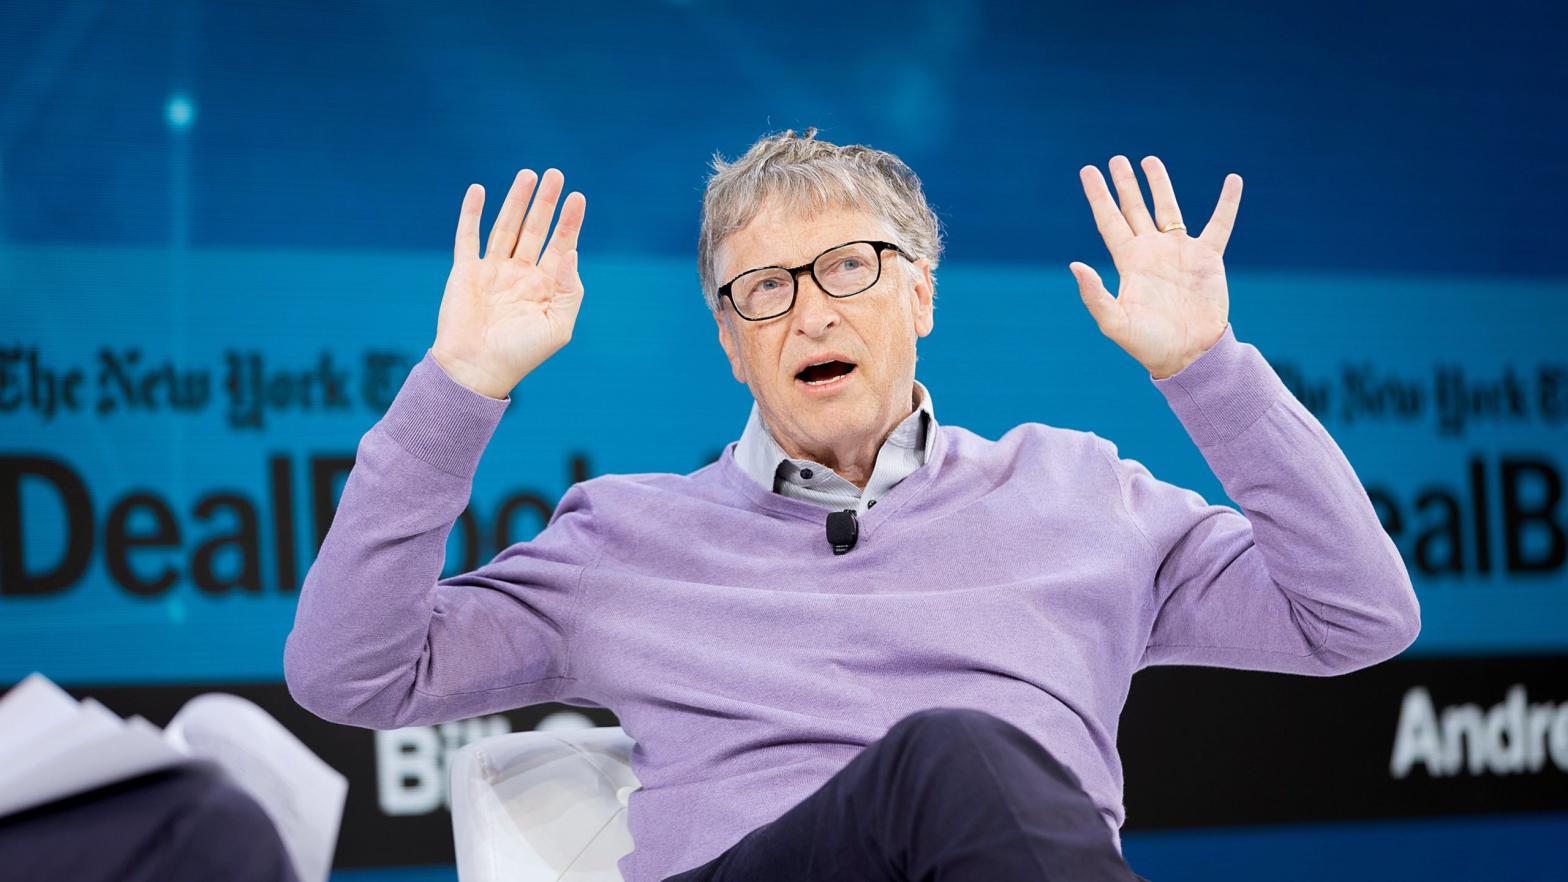 Microsoft founder Bill Gates, seen here speaking at the November 2019 New York Times Dealbook conference on his role as the co-chair of the Bill & Melinda Gates Foundation. (Photo: Mike Cohen / Getty Images for the New York Times, Getty Images)